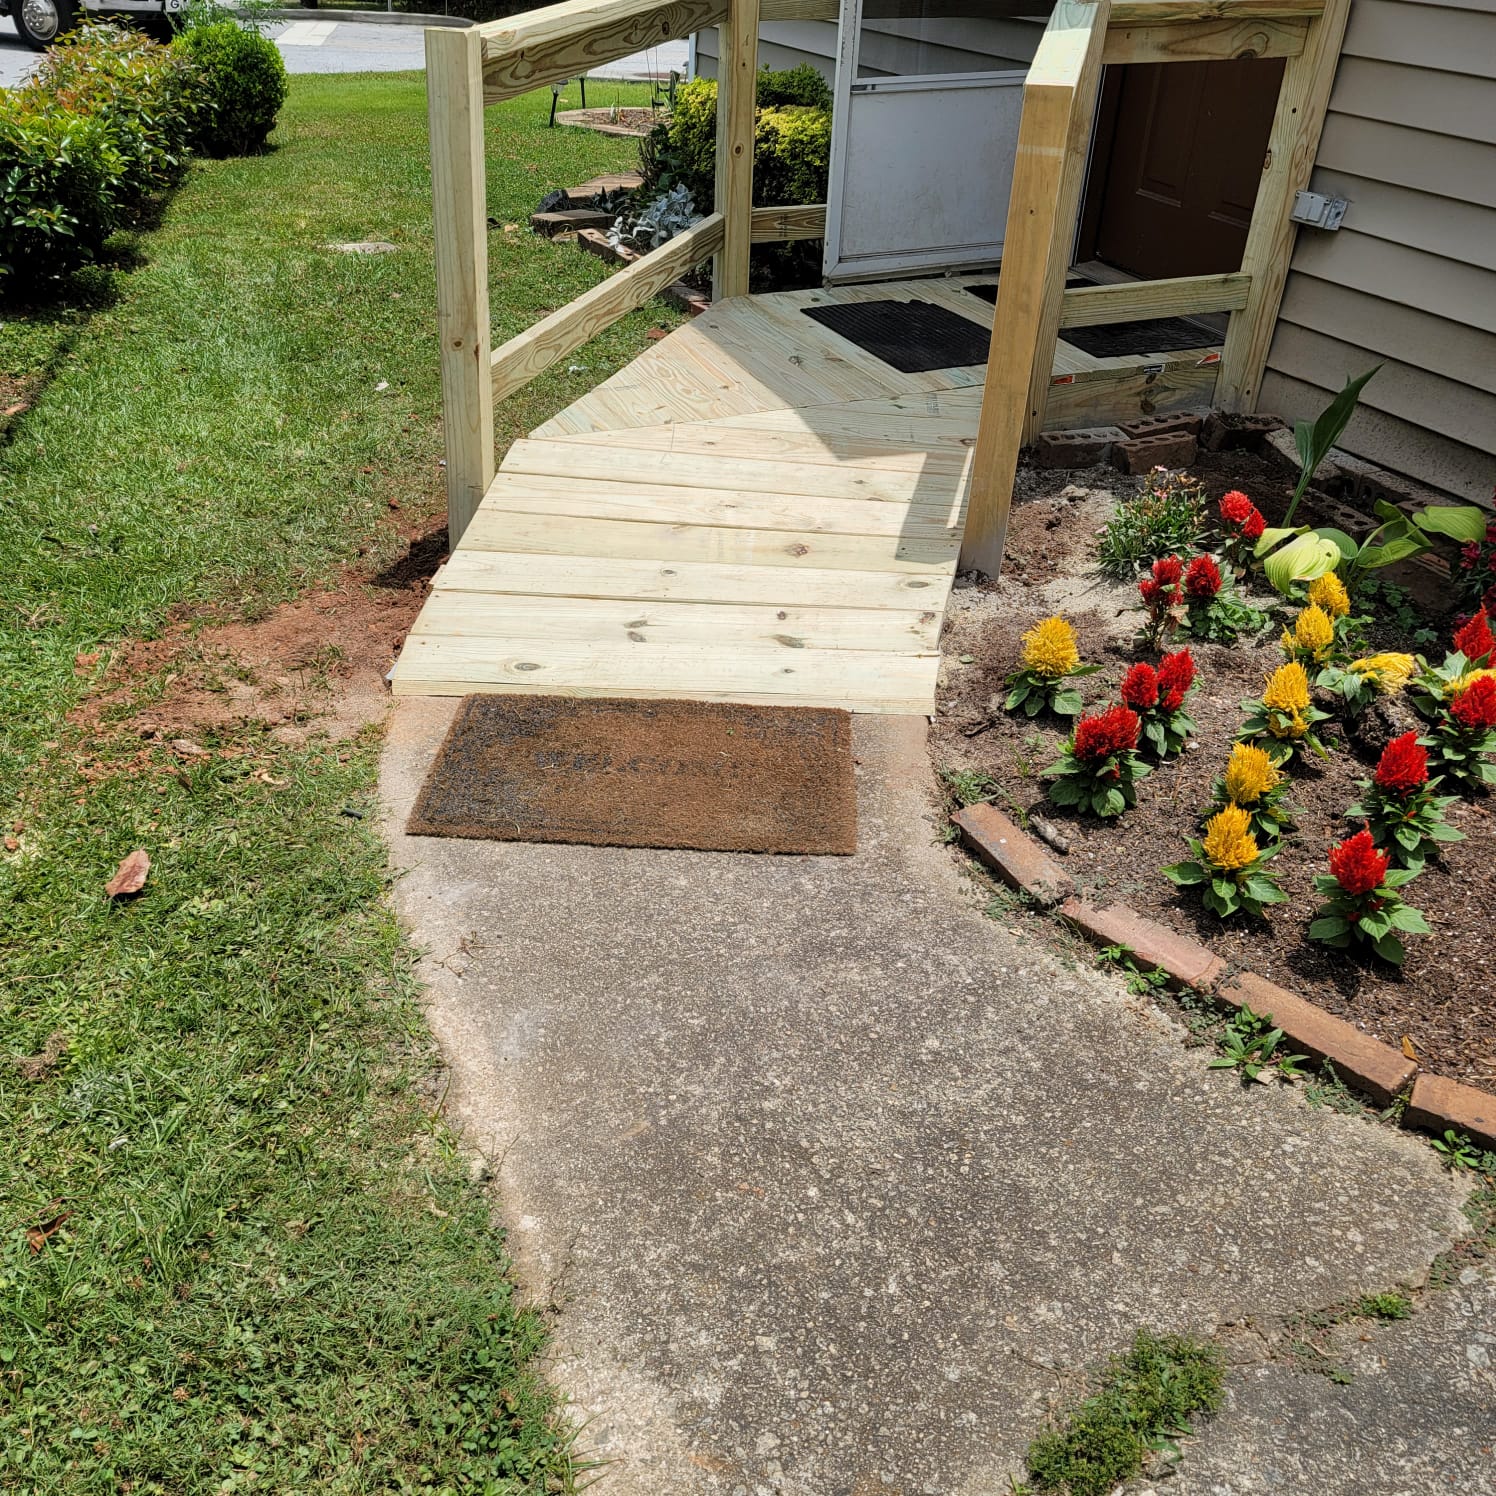 Front door and landscaping after new ramp added.